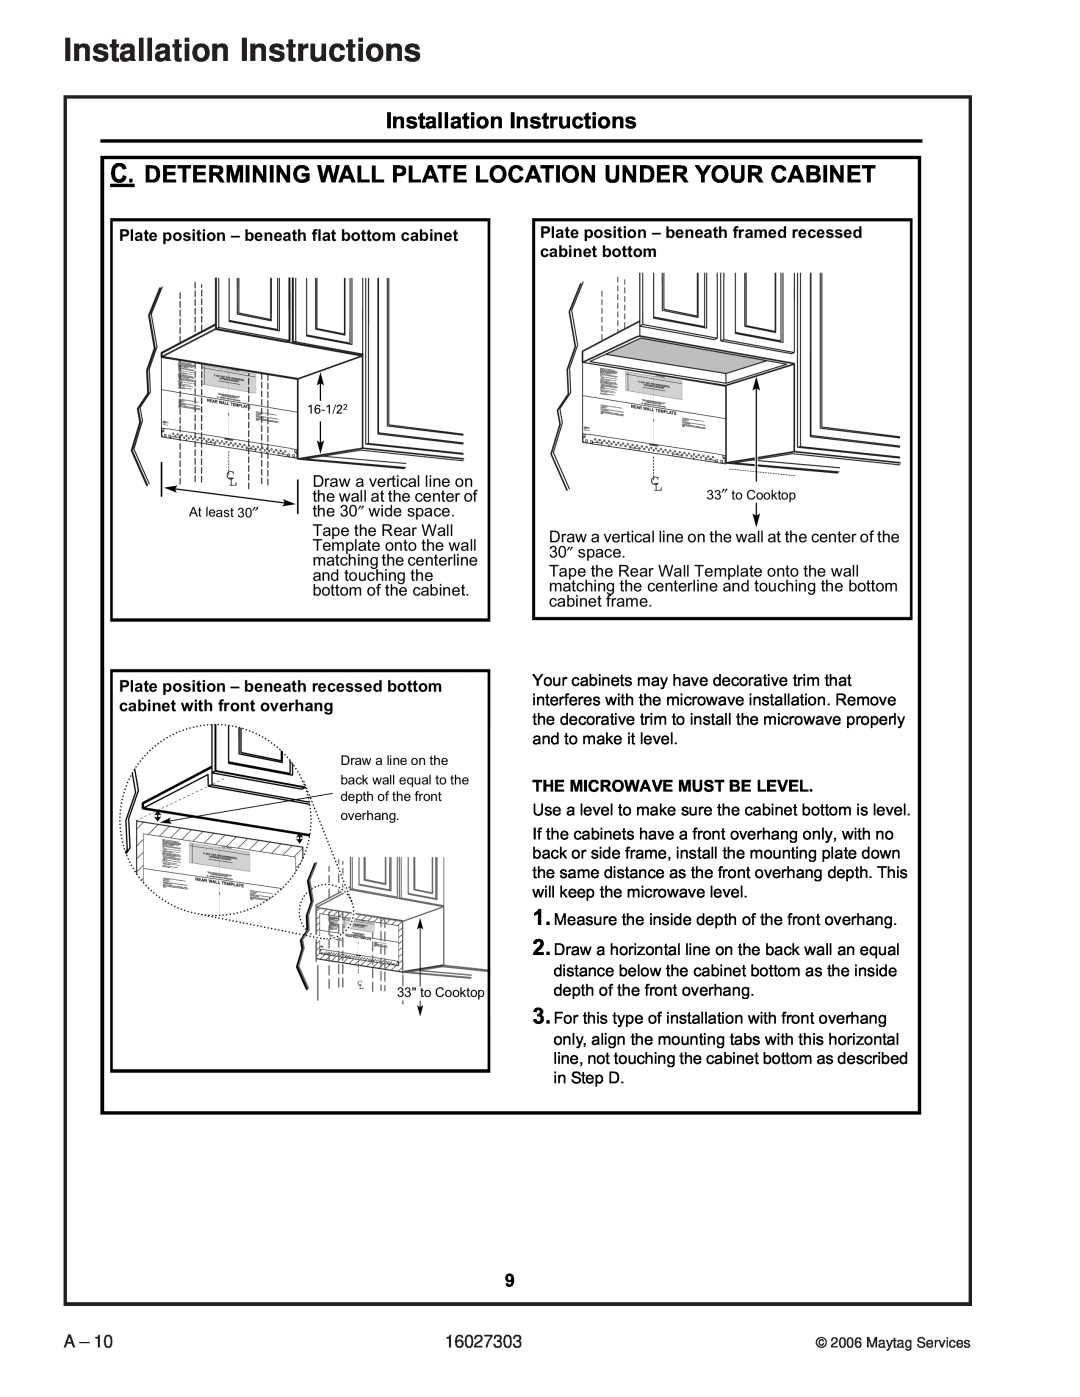 Maytag UMV1152CA Installation Instructions, Plate position – beneath flat bottom cabinet, The Microwave Must Be Level 